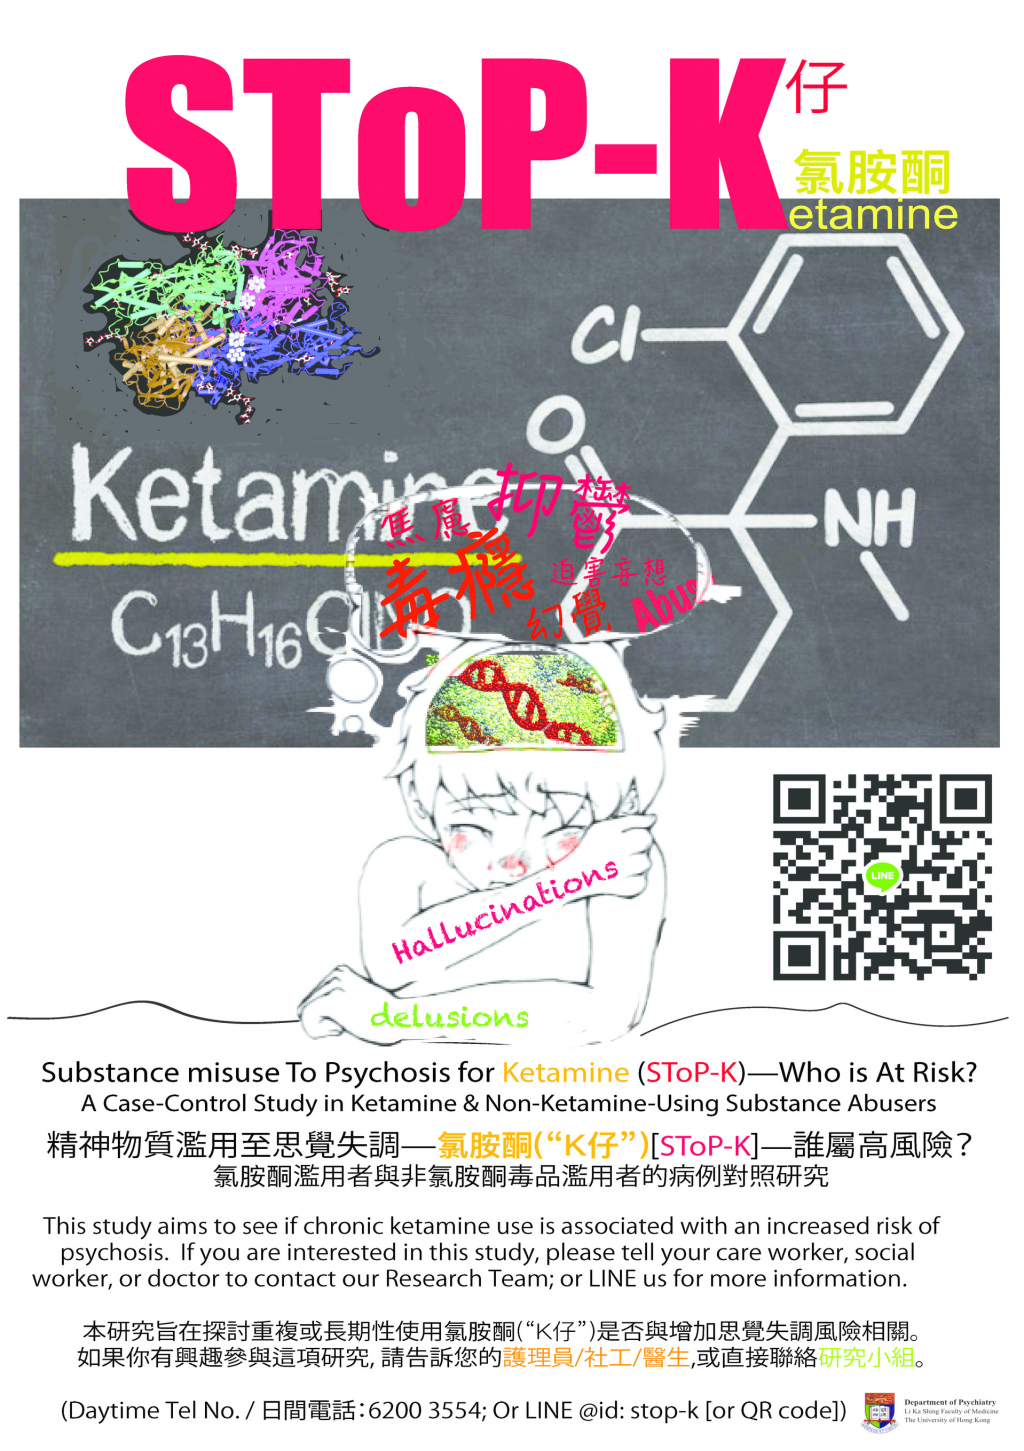 Substance Misuse to Psychosis for Ketamine (SToP-K)-Who's at Risk? A Case-Control Study 精神物質濫用至思覺失調-氯胺酮(